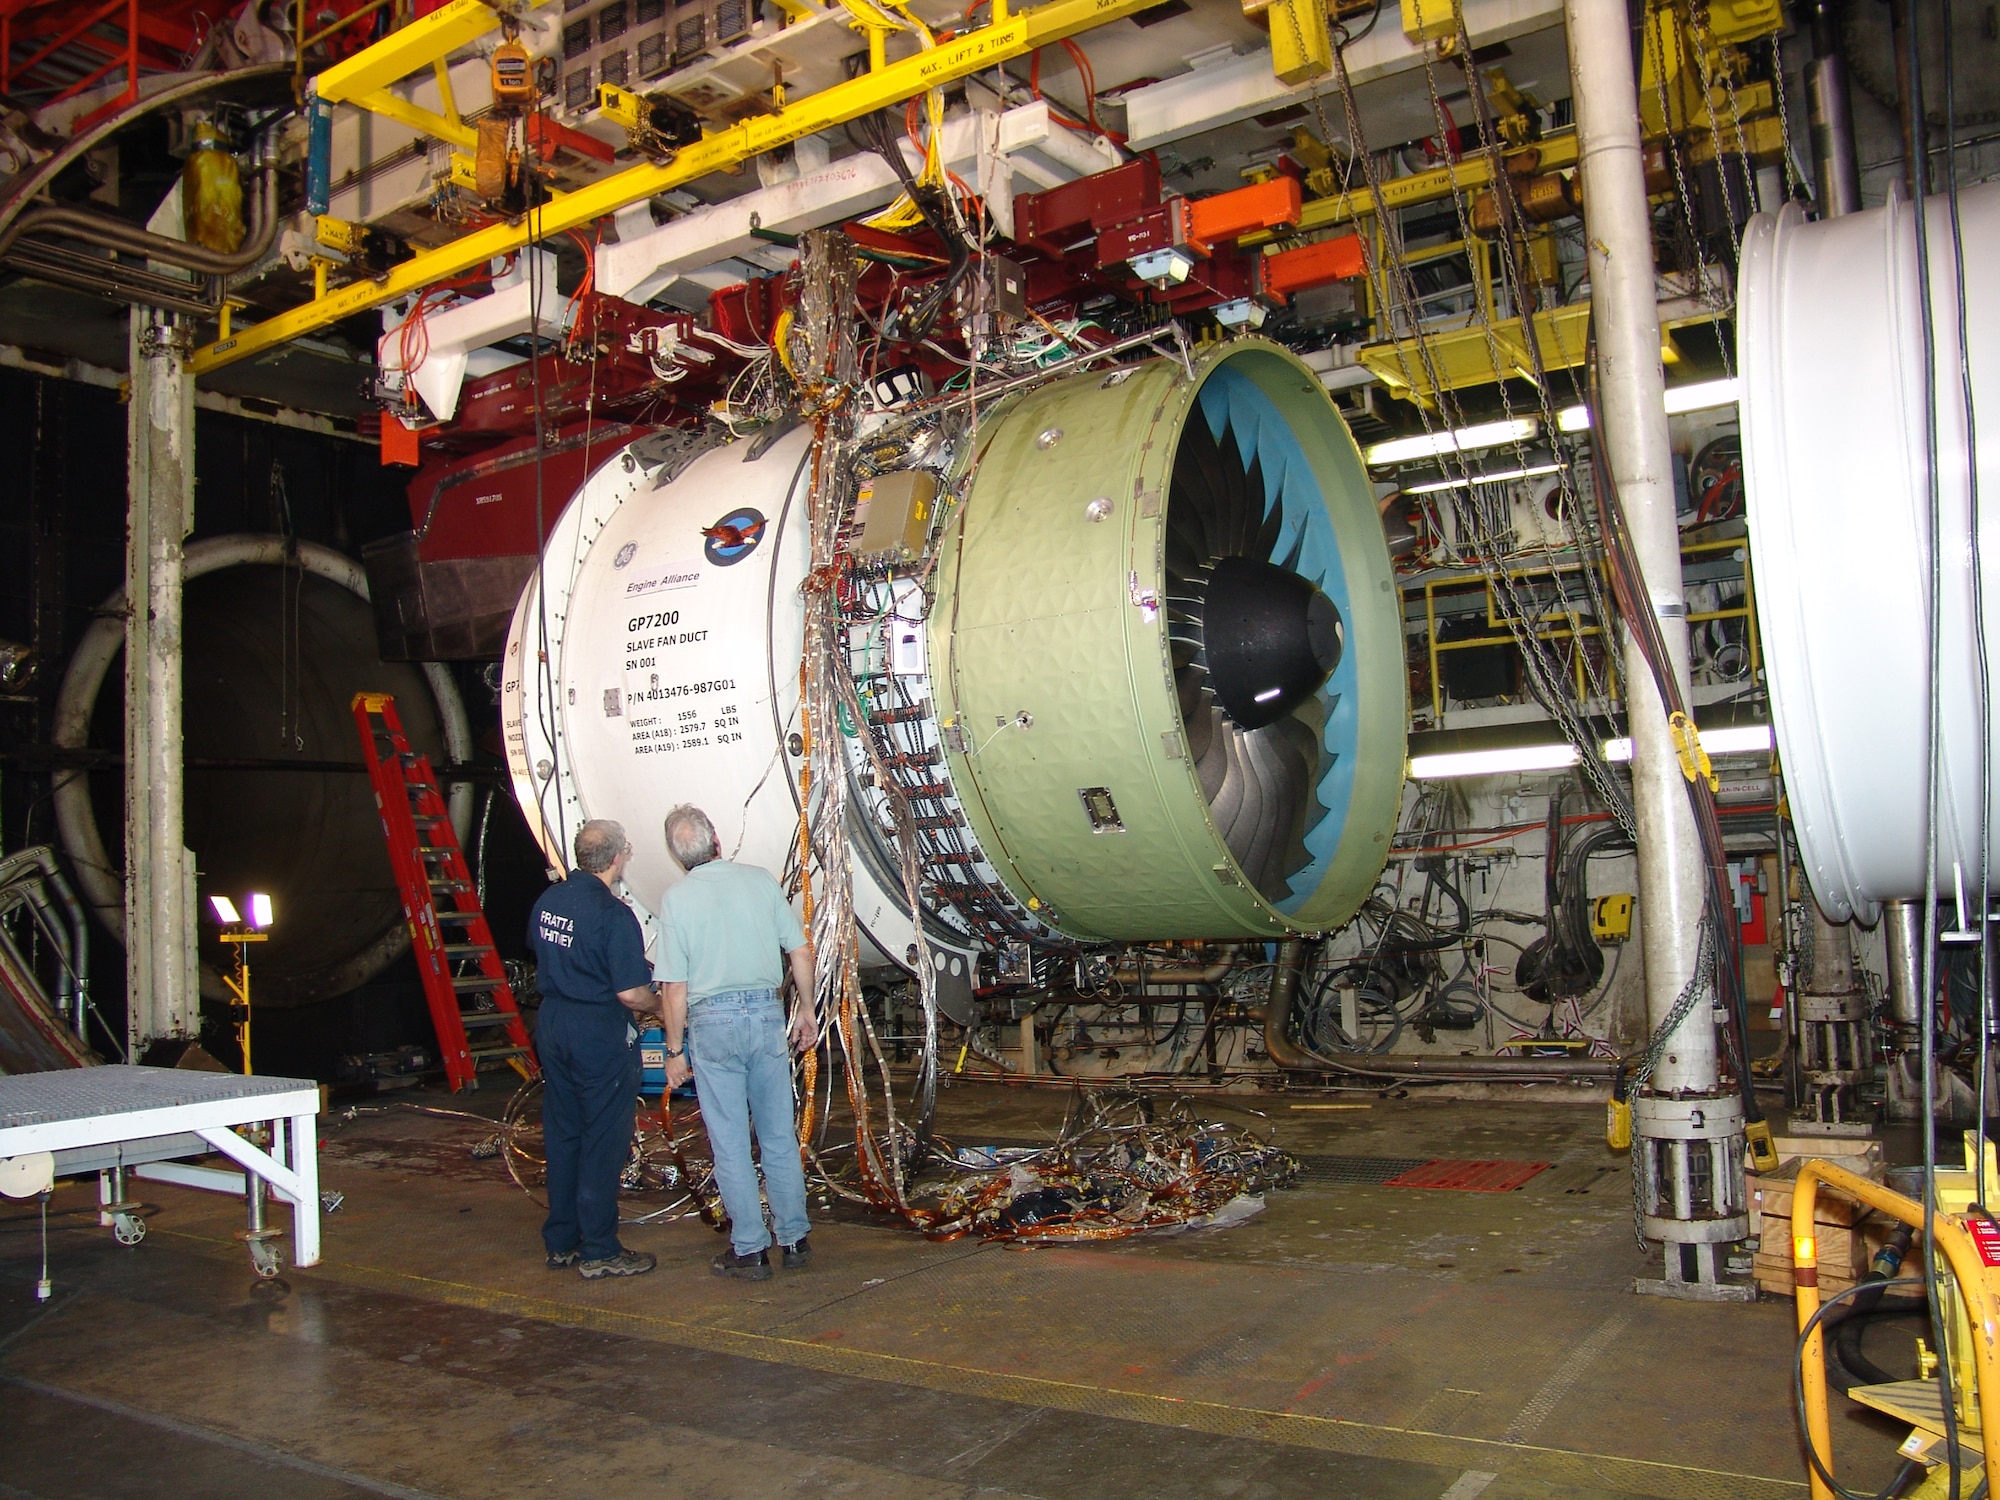 A Pratt & Whitney engine technical specialist and an AEDC technician inspect a GP7200 engine, one of the power plants for the Airbus Industries A380, in April 2004 prior to testing in AEDC’s Aeropropulsion Systems Test Facility Test Cell. The GP7200 is manufactured under the GE-Pratt & Whitney Engine Alliance.